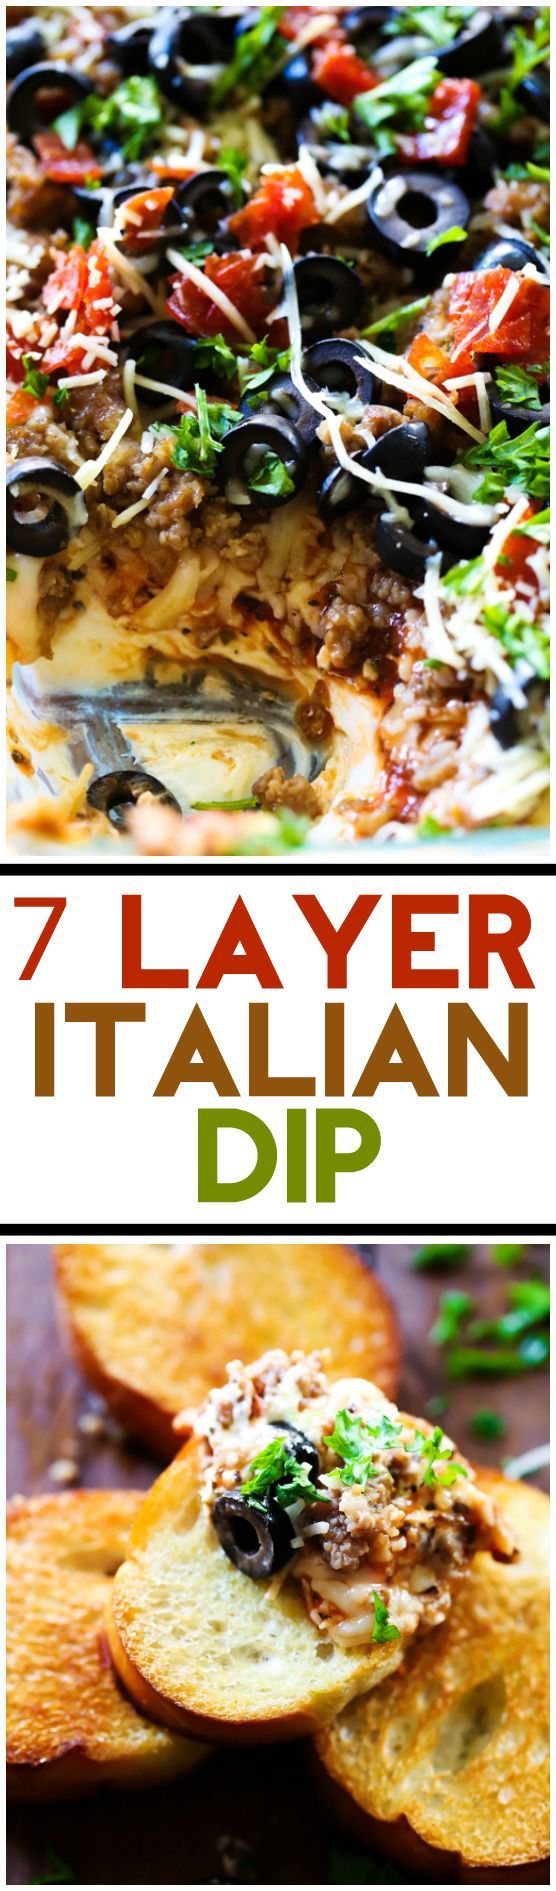 7 Layer Italian Dip… Seven Layers of Italian flavor and ingredient heaven! This will be one appetizer yo